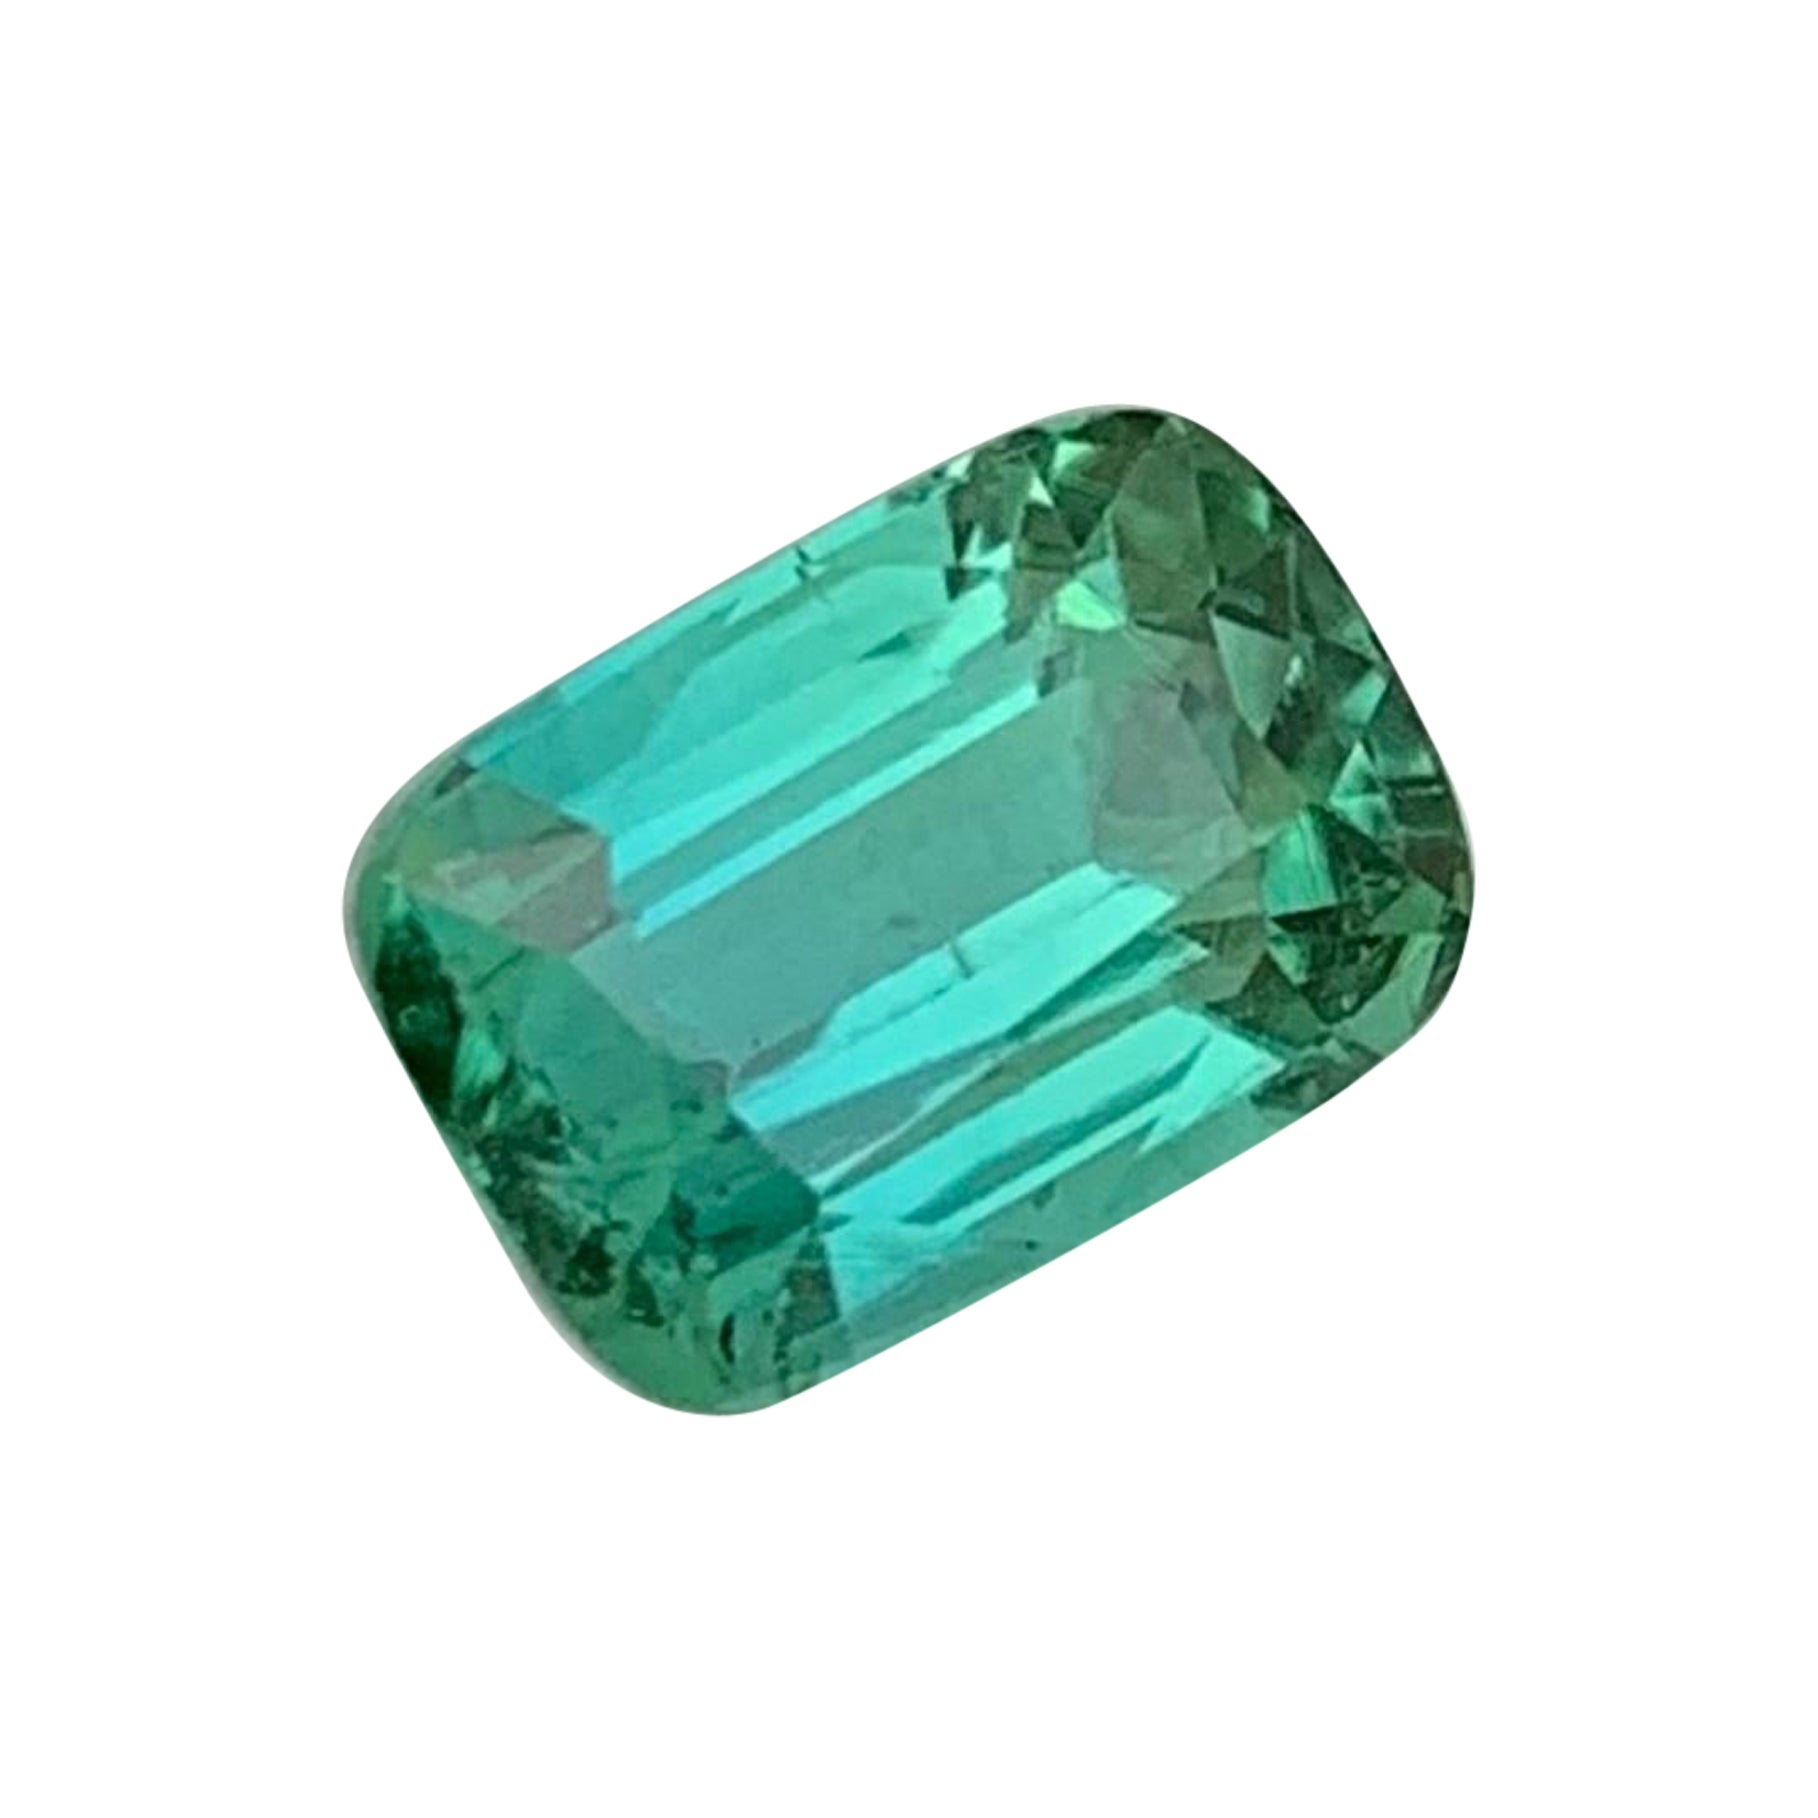 Beauteous 1.90 Cts Blueish Green Loose Tourmaline Ring Gemstone Afghan Mine 